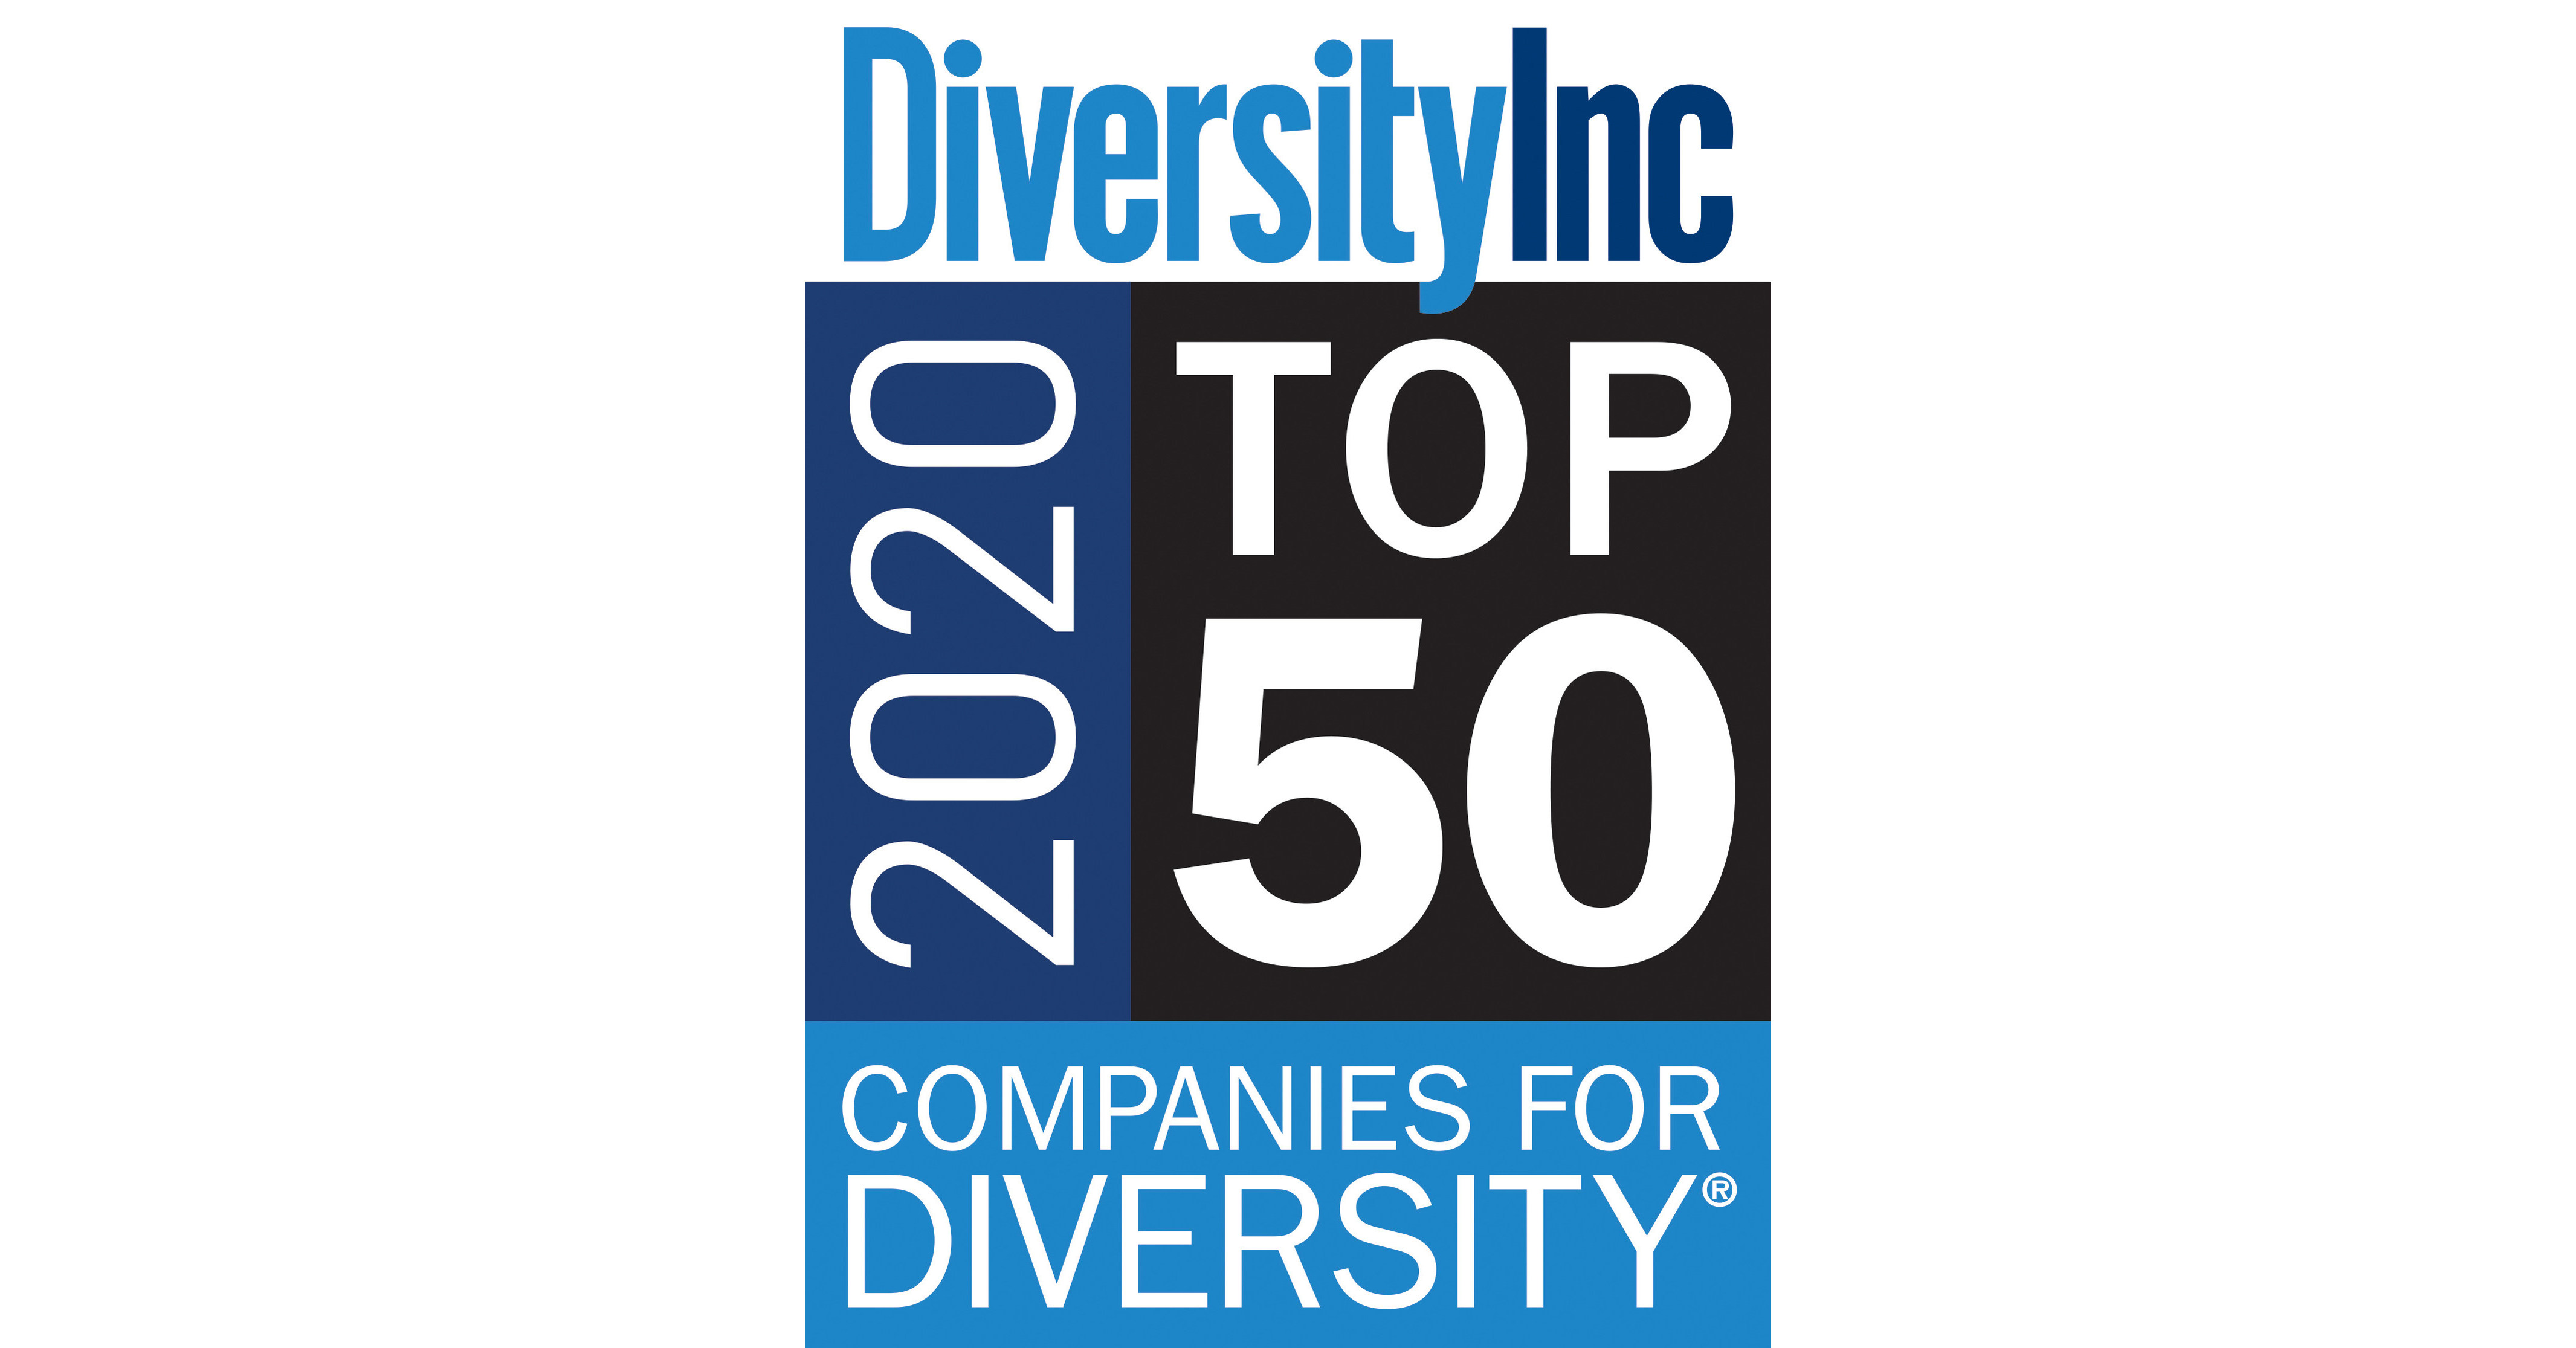 KeyBank ranks 35 on the 2020 Top 50 Companies List from DiversityInc